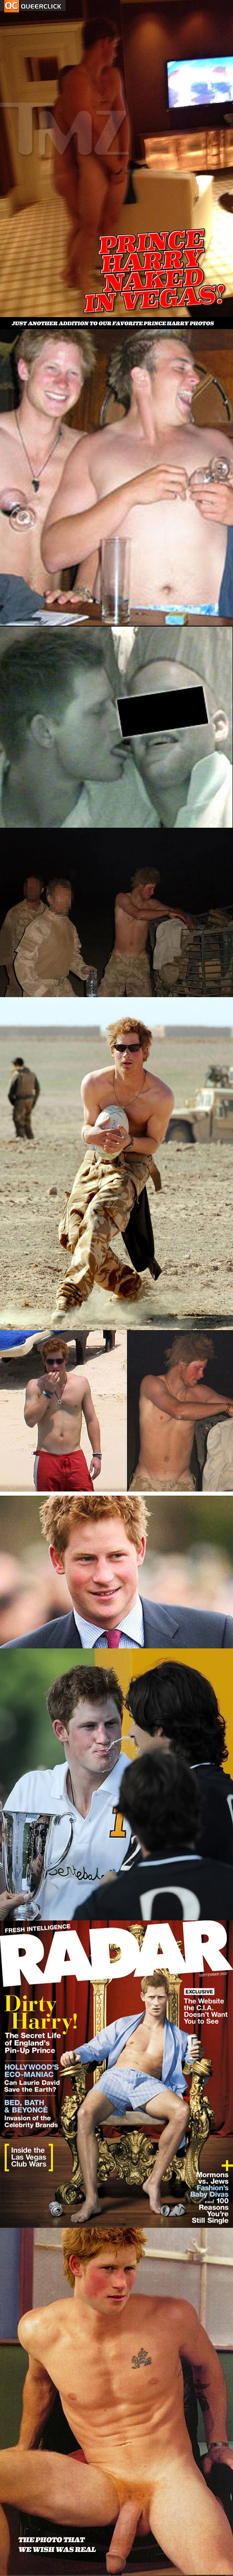 Prince Harry's Naked Ass in Vegas